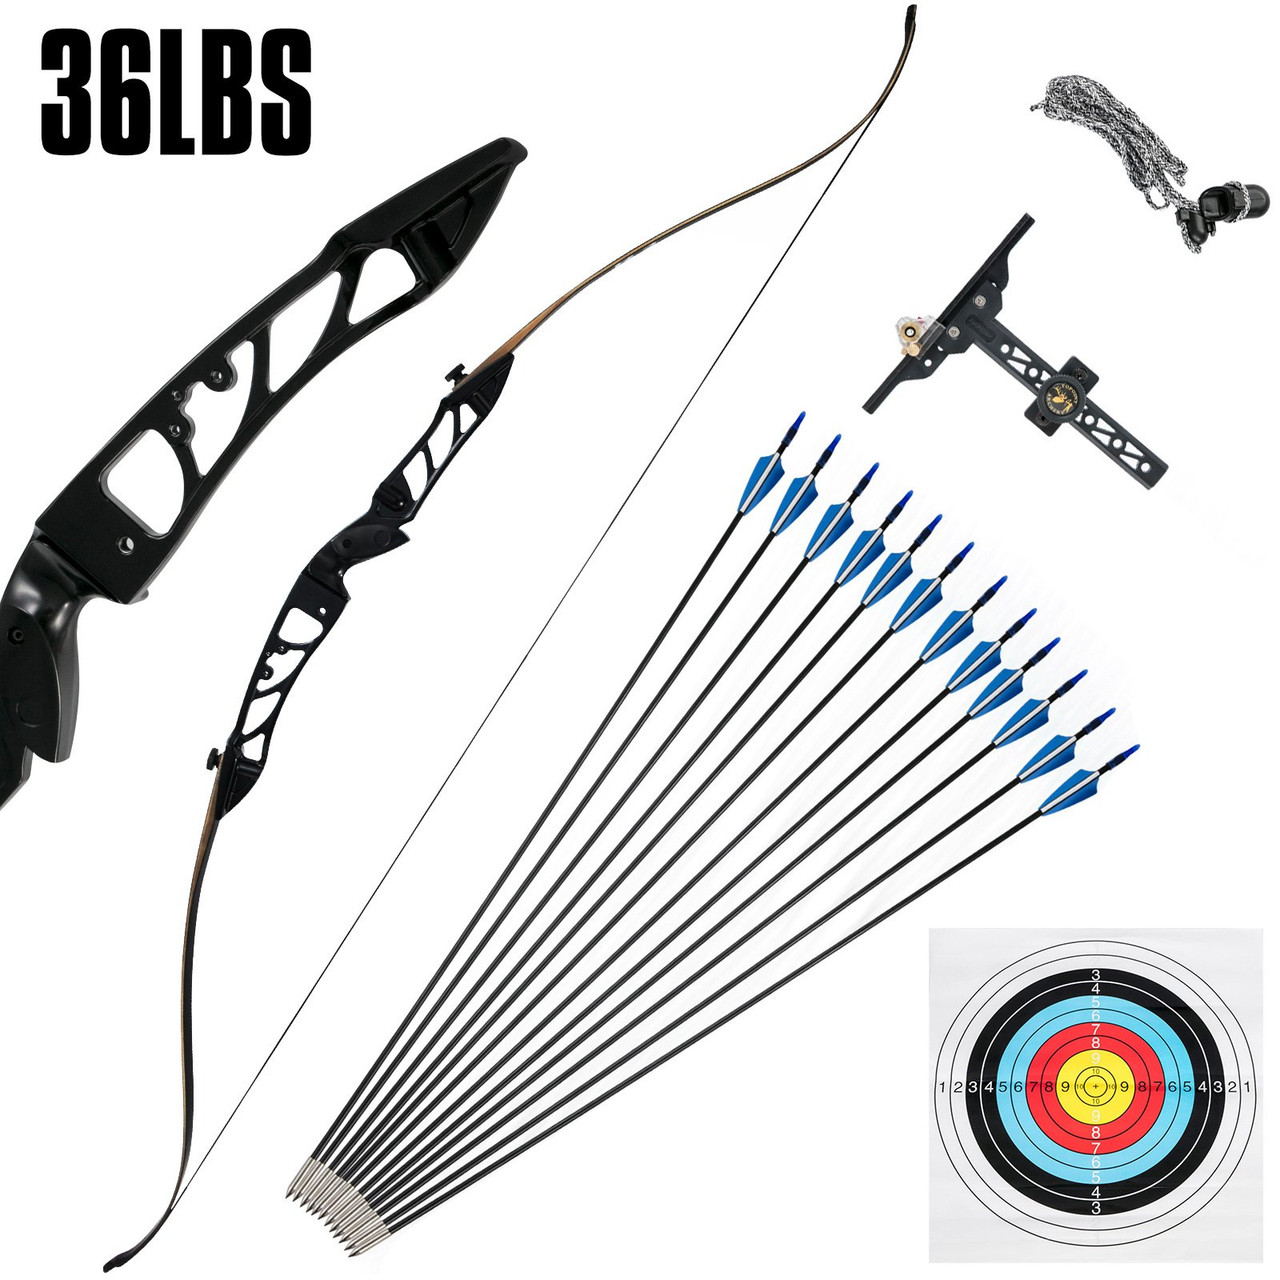 Recurve Bow Set 20 28 32 36 38lbs Archery Bow Aluminum Alloy Takedown Recurve Bow Right Hand Bow with 12 Arrows for Adults Youth Hunting Shooting Practice Competition (Black, 36 LBS)